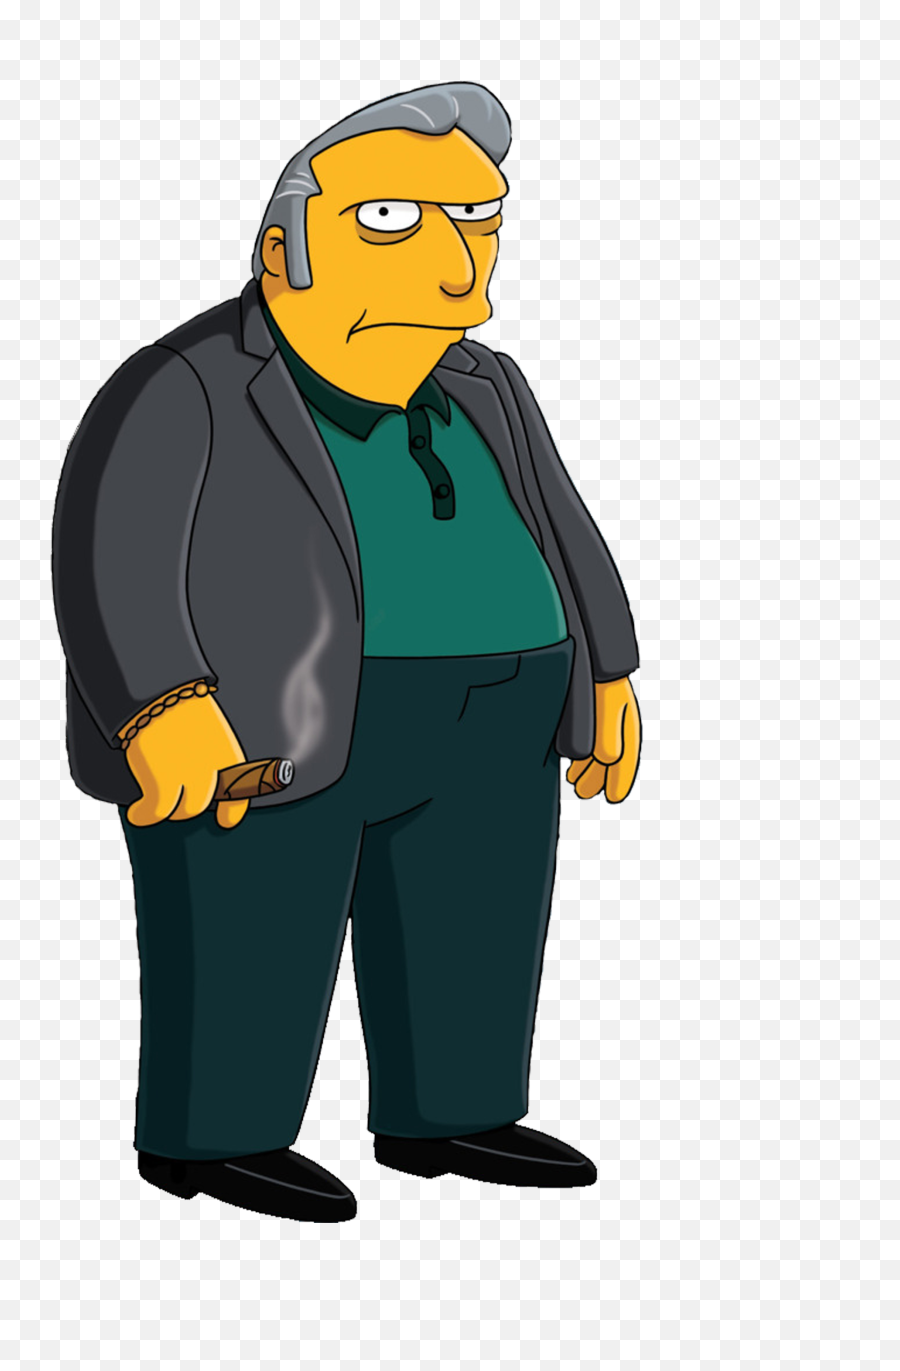 Download The Simpsons - Die Simpsons Fat Tony Png Image With Fat Tony The Simpsons,Fat Png